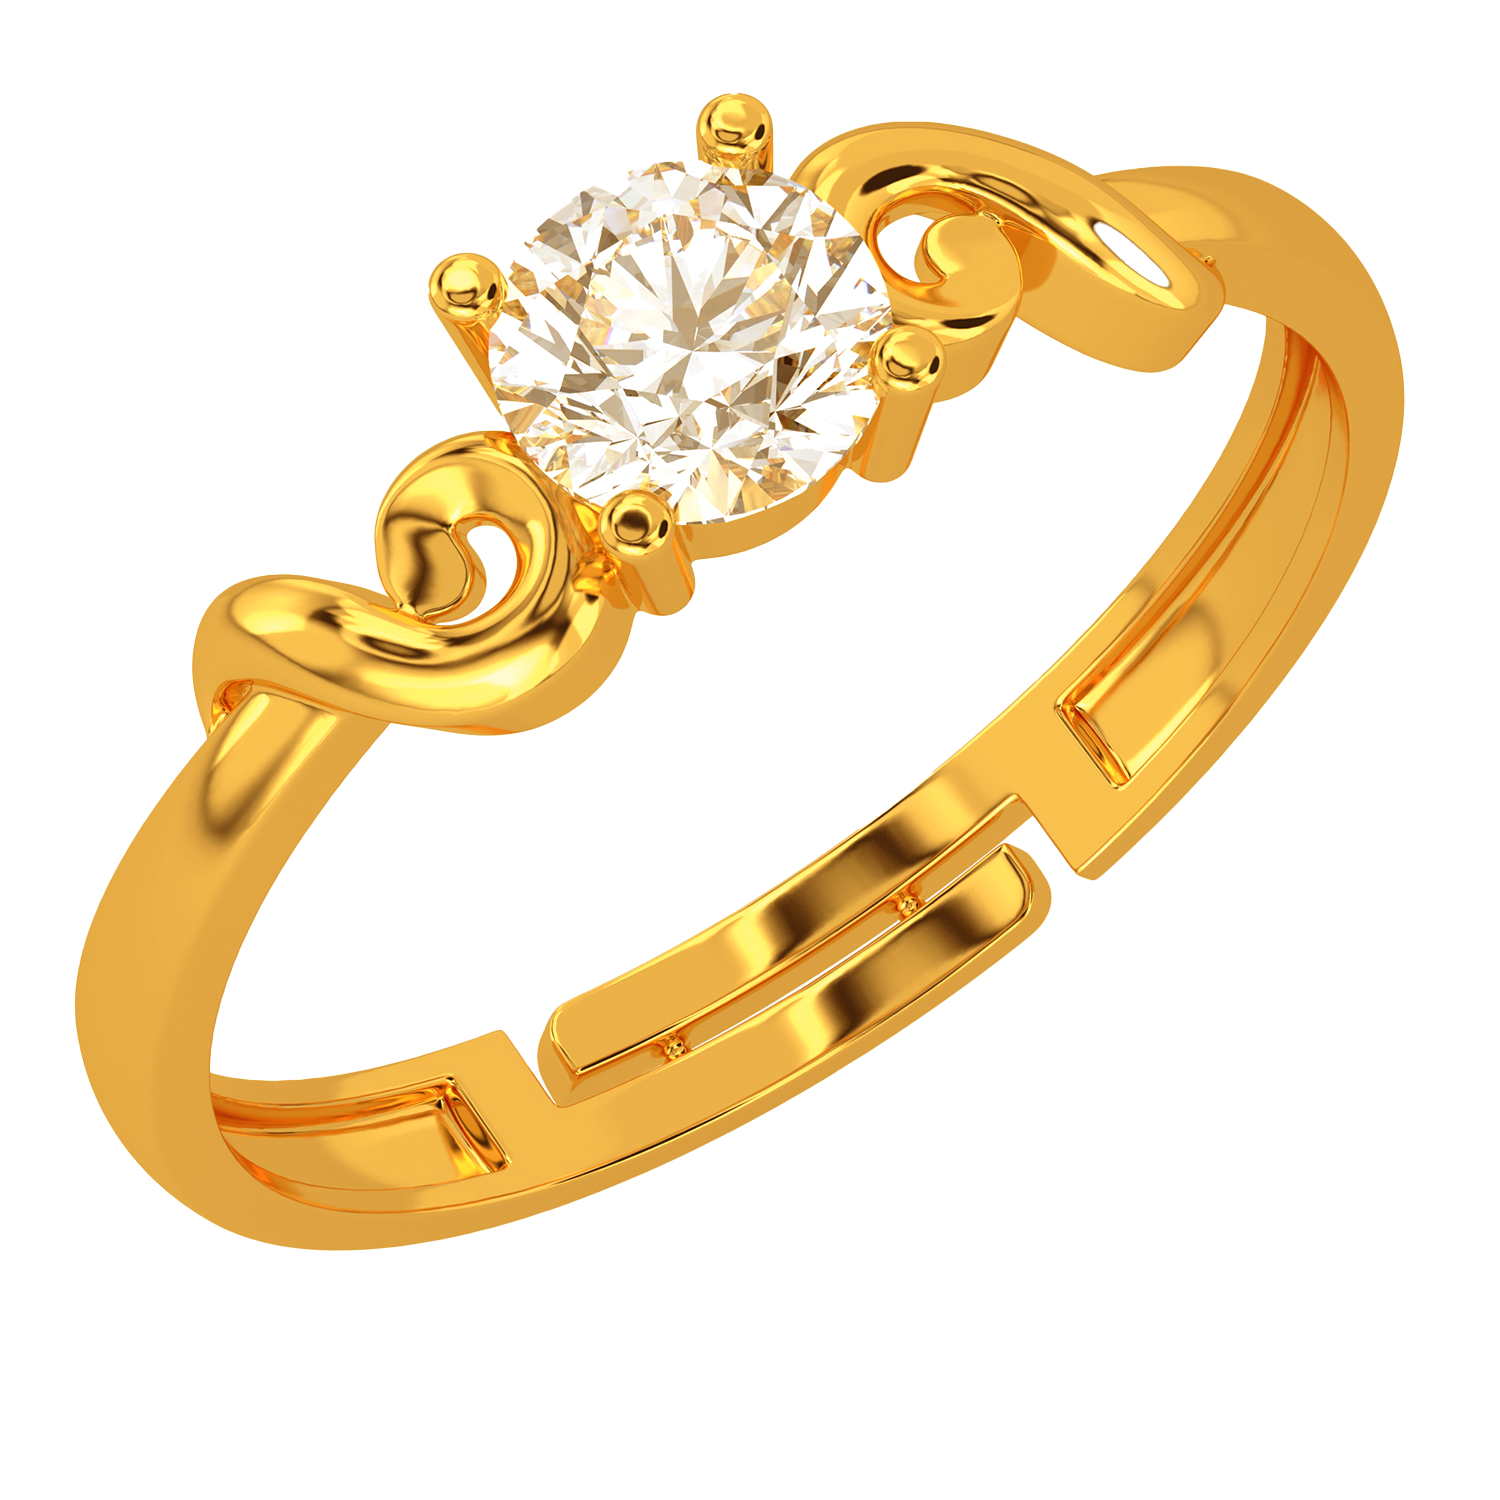 Mix and Match: Gold and Diamond Rings